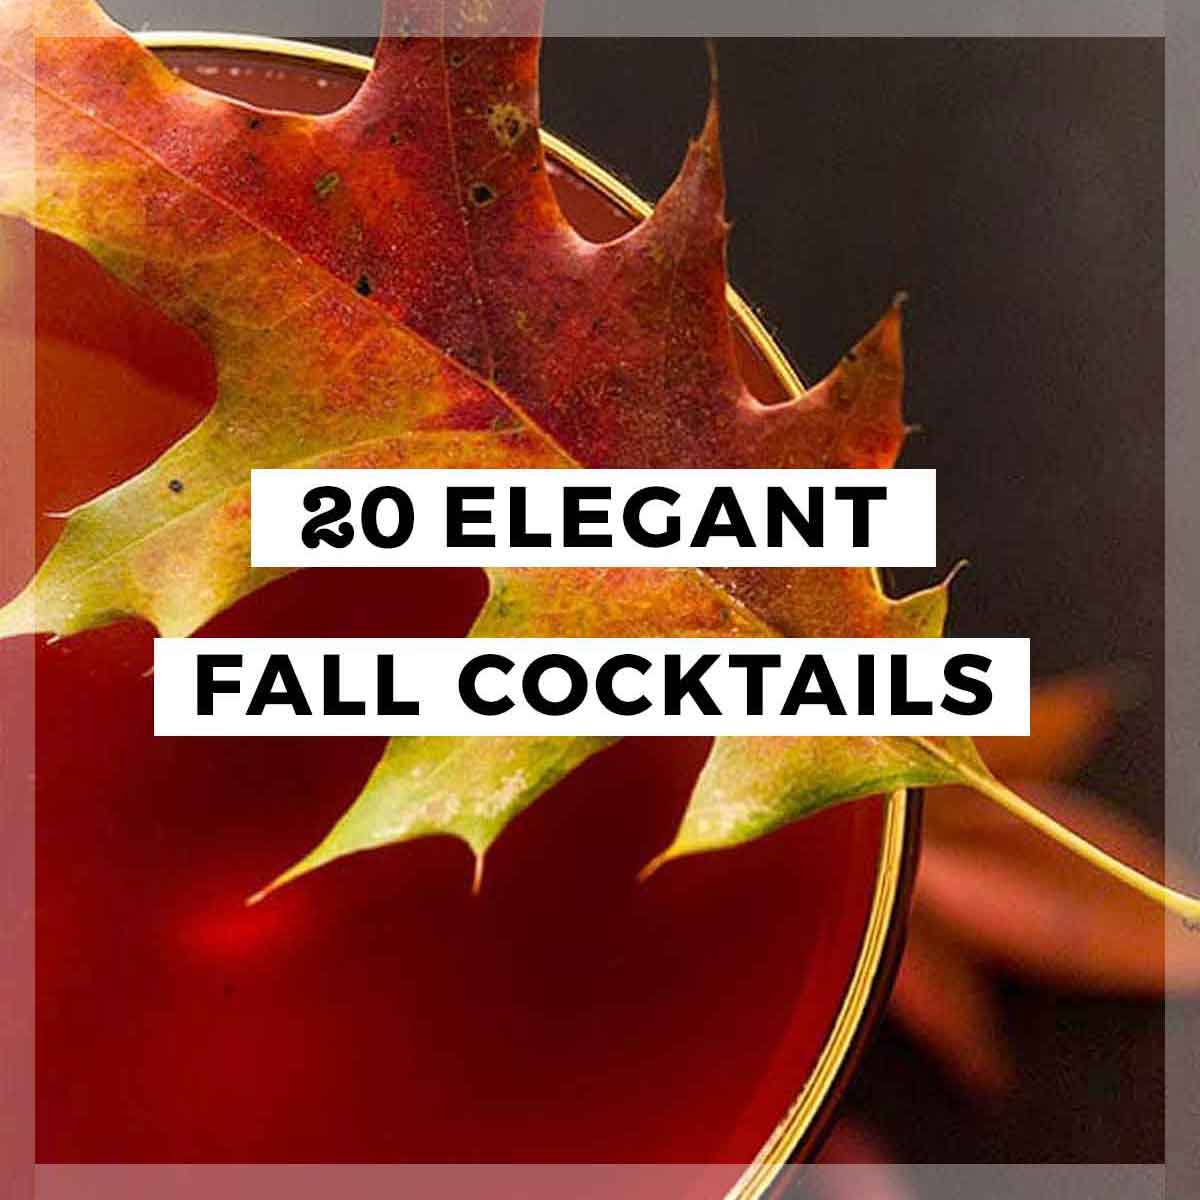 A collage of 4 cocktails and a title that says "20 Elegant Fall Cocktails."